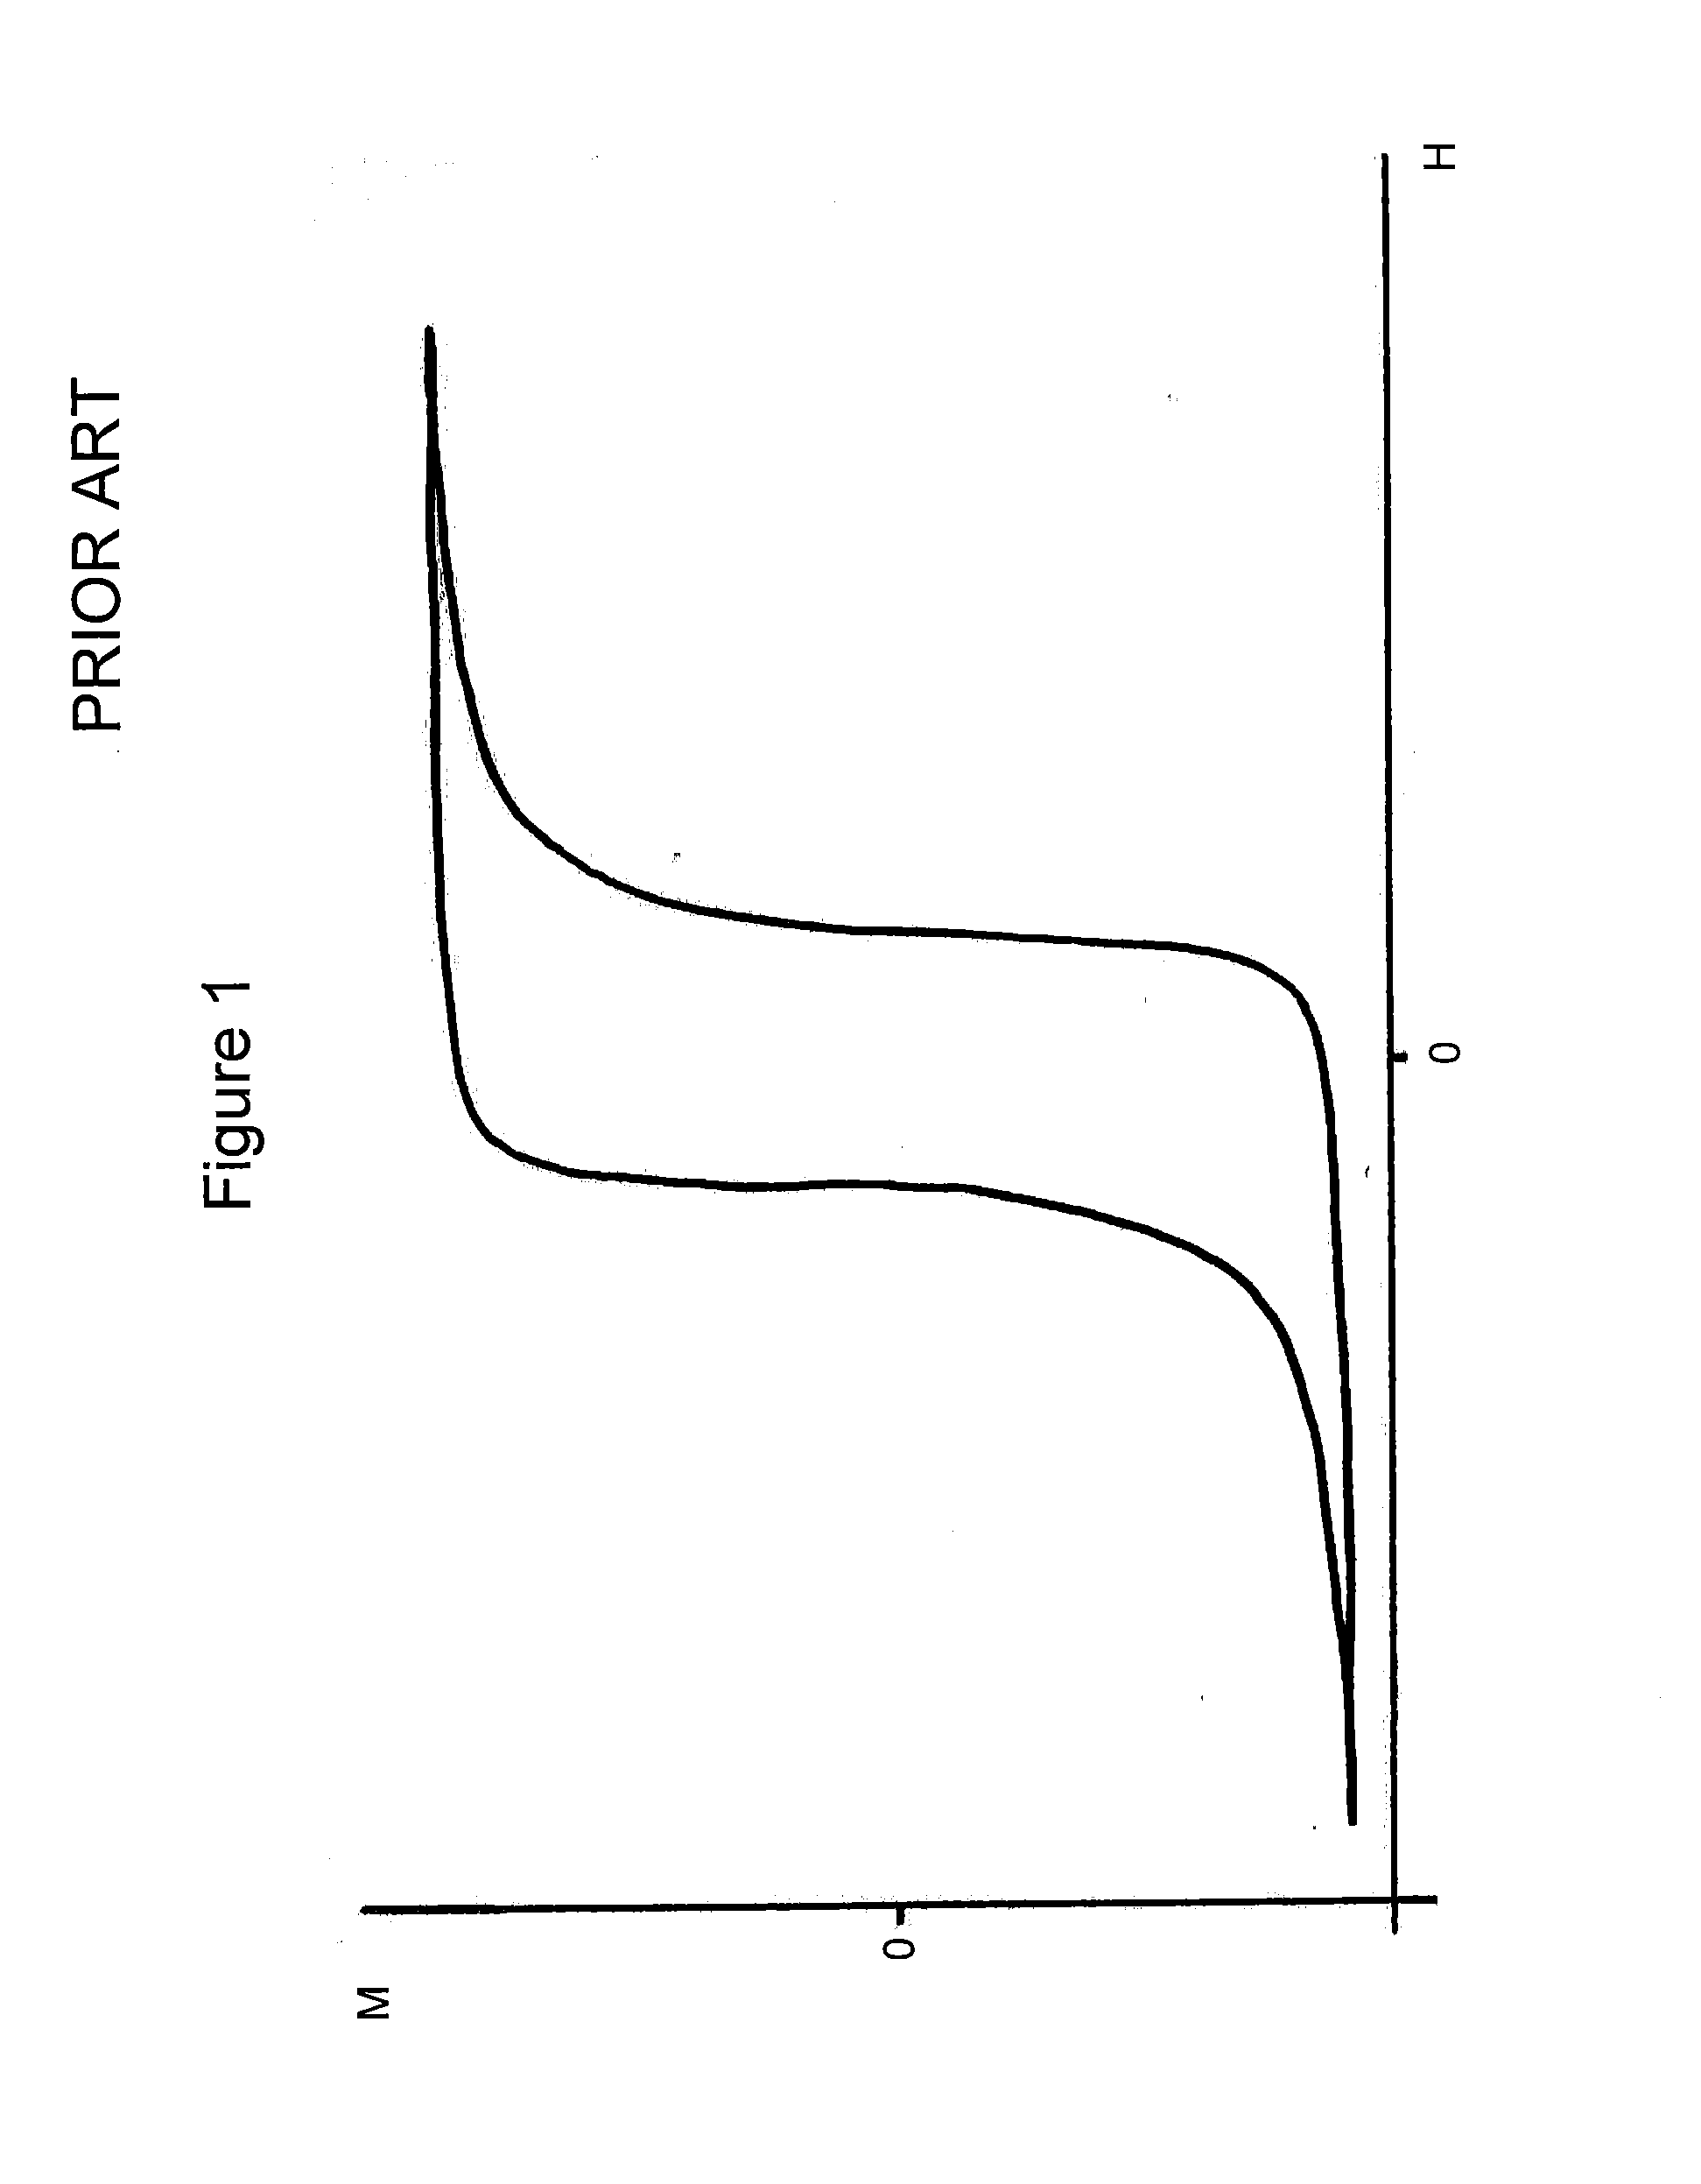 Apparatus for testing sample properties in a magnetic field